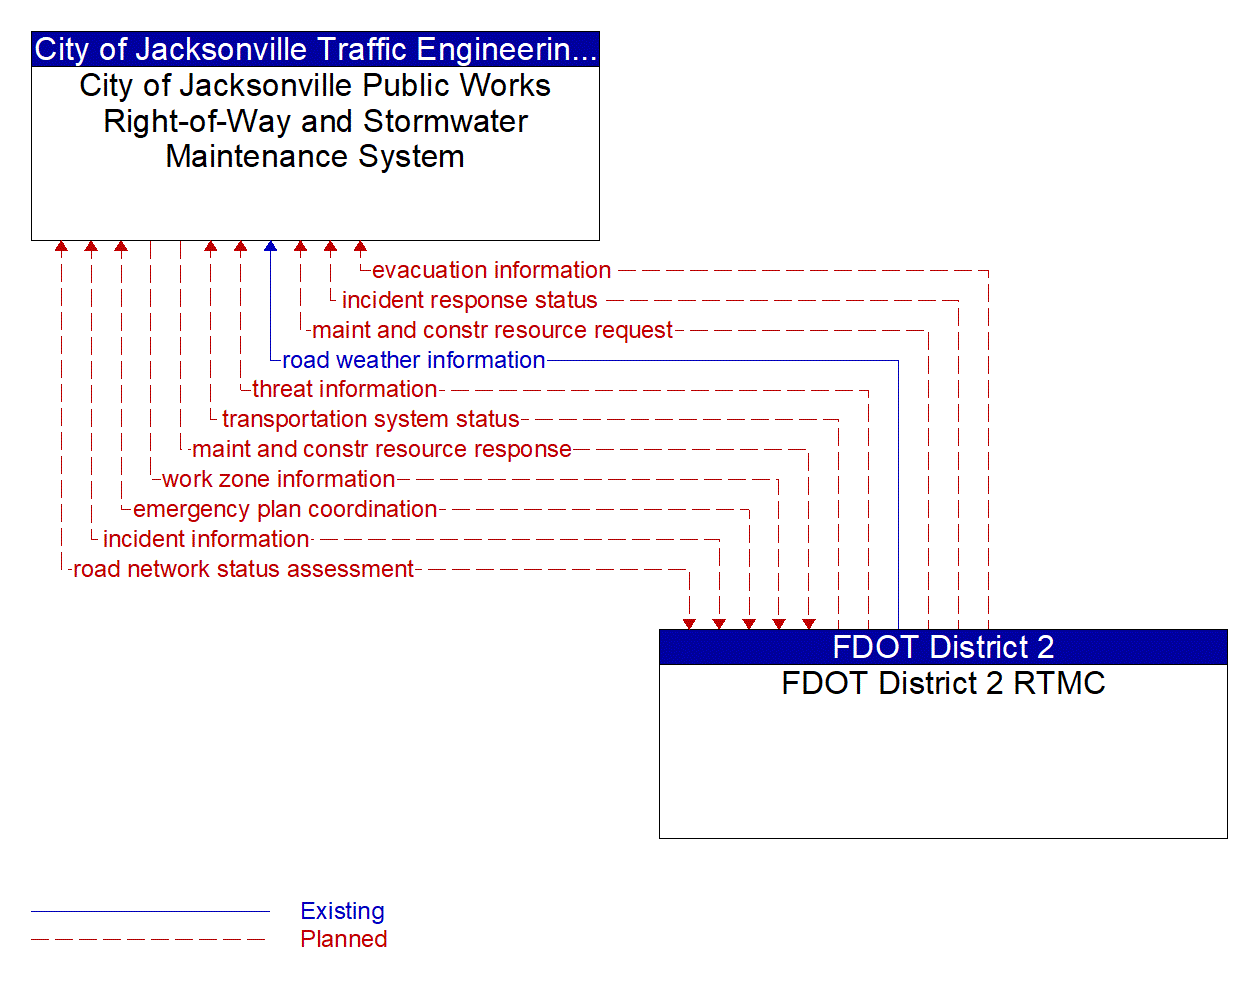 Architecture Flow Diagram: FDOT District 2 RTMC <--> City of Jacksonville Public Works Right-of-Way and Stormwater Maintenance System